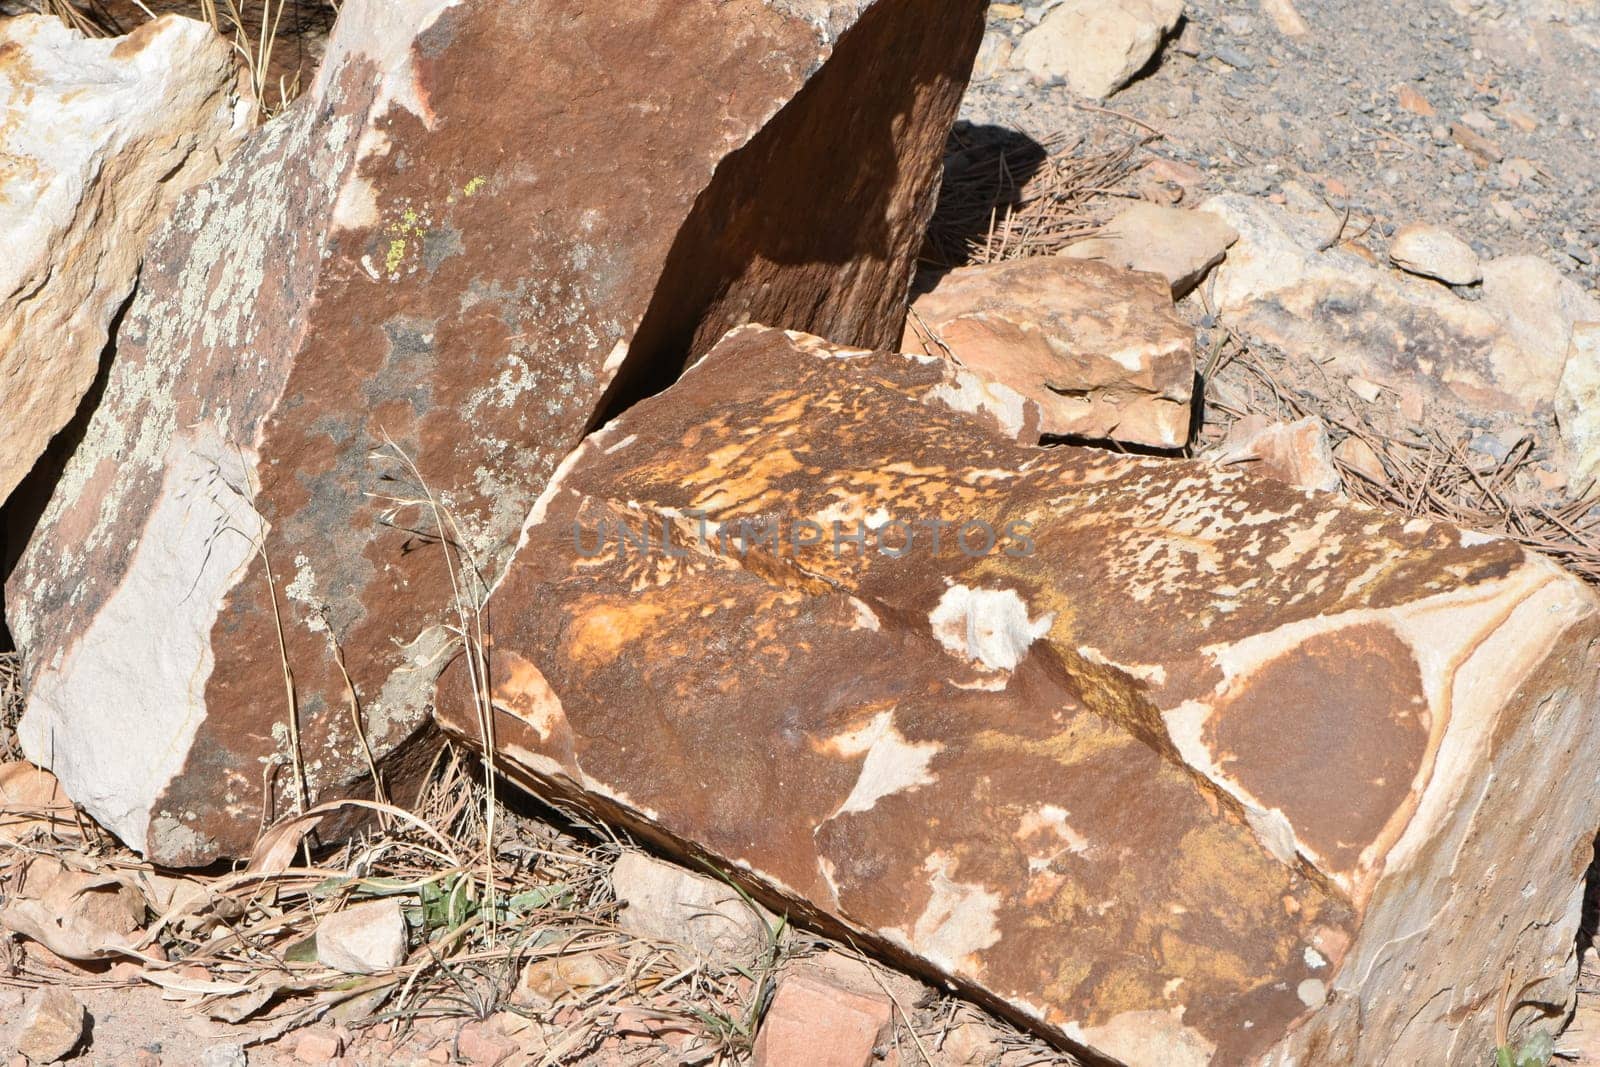 Weathered Rock Pieces near Boulder Colorado, Geology Photo. High quality photo